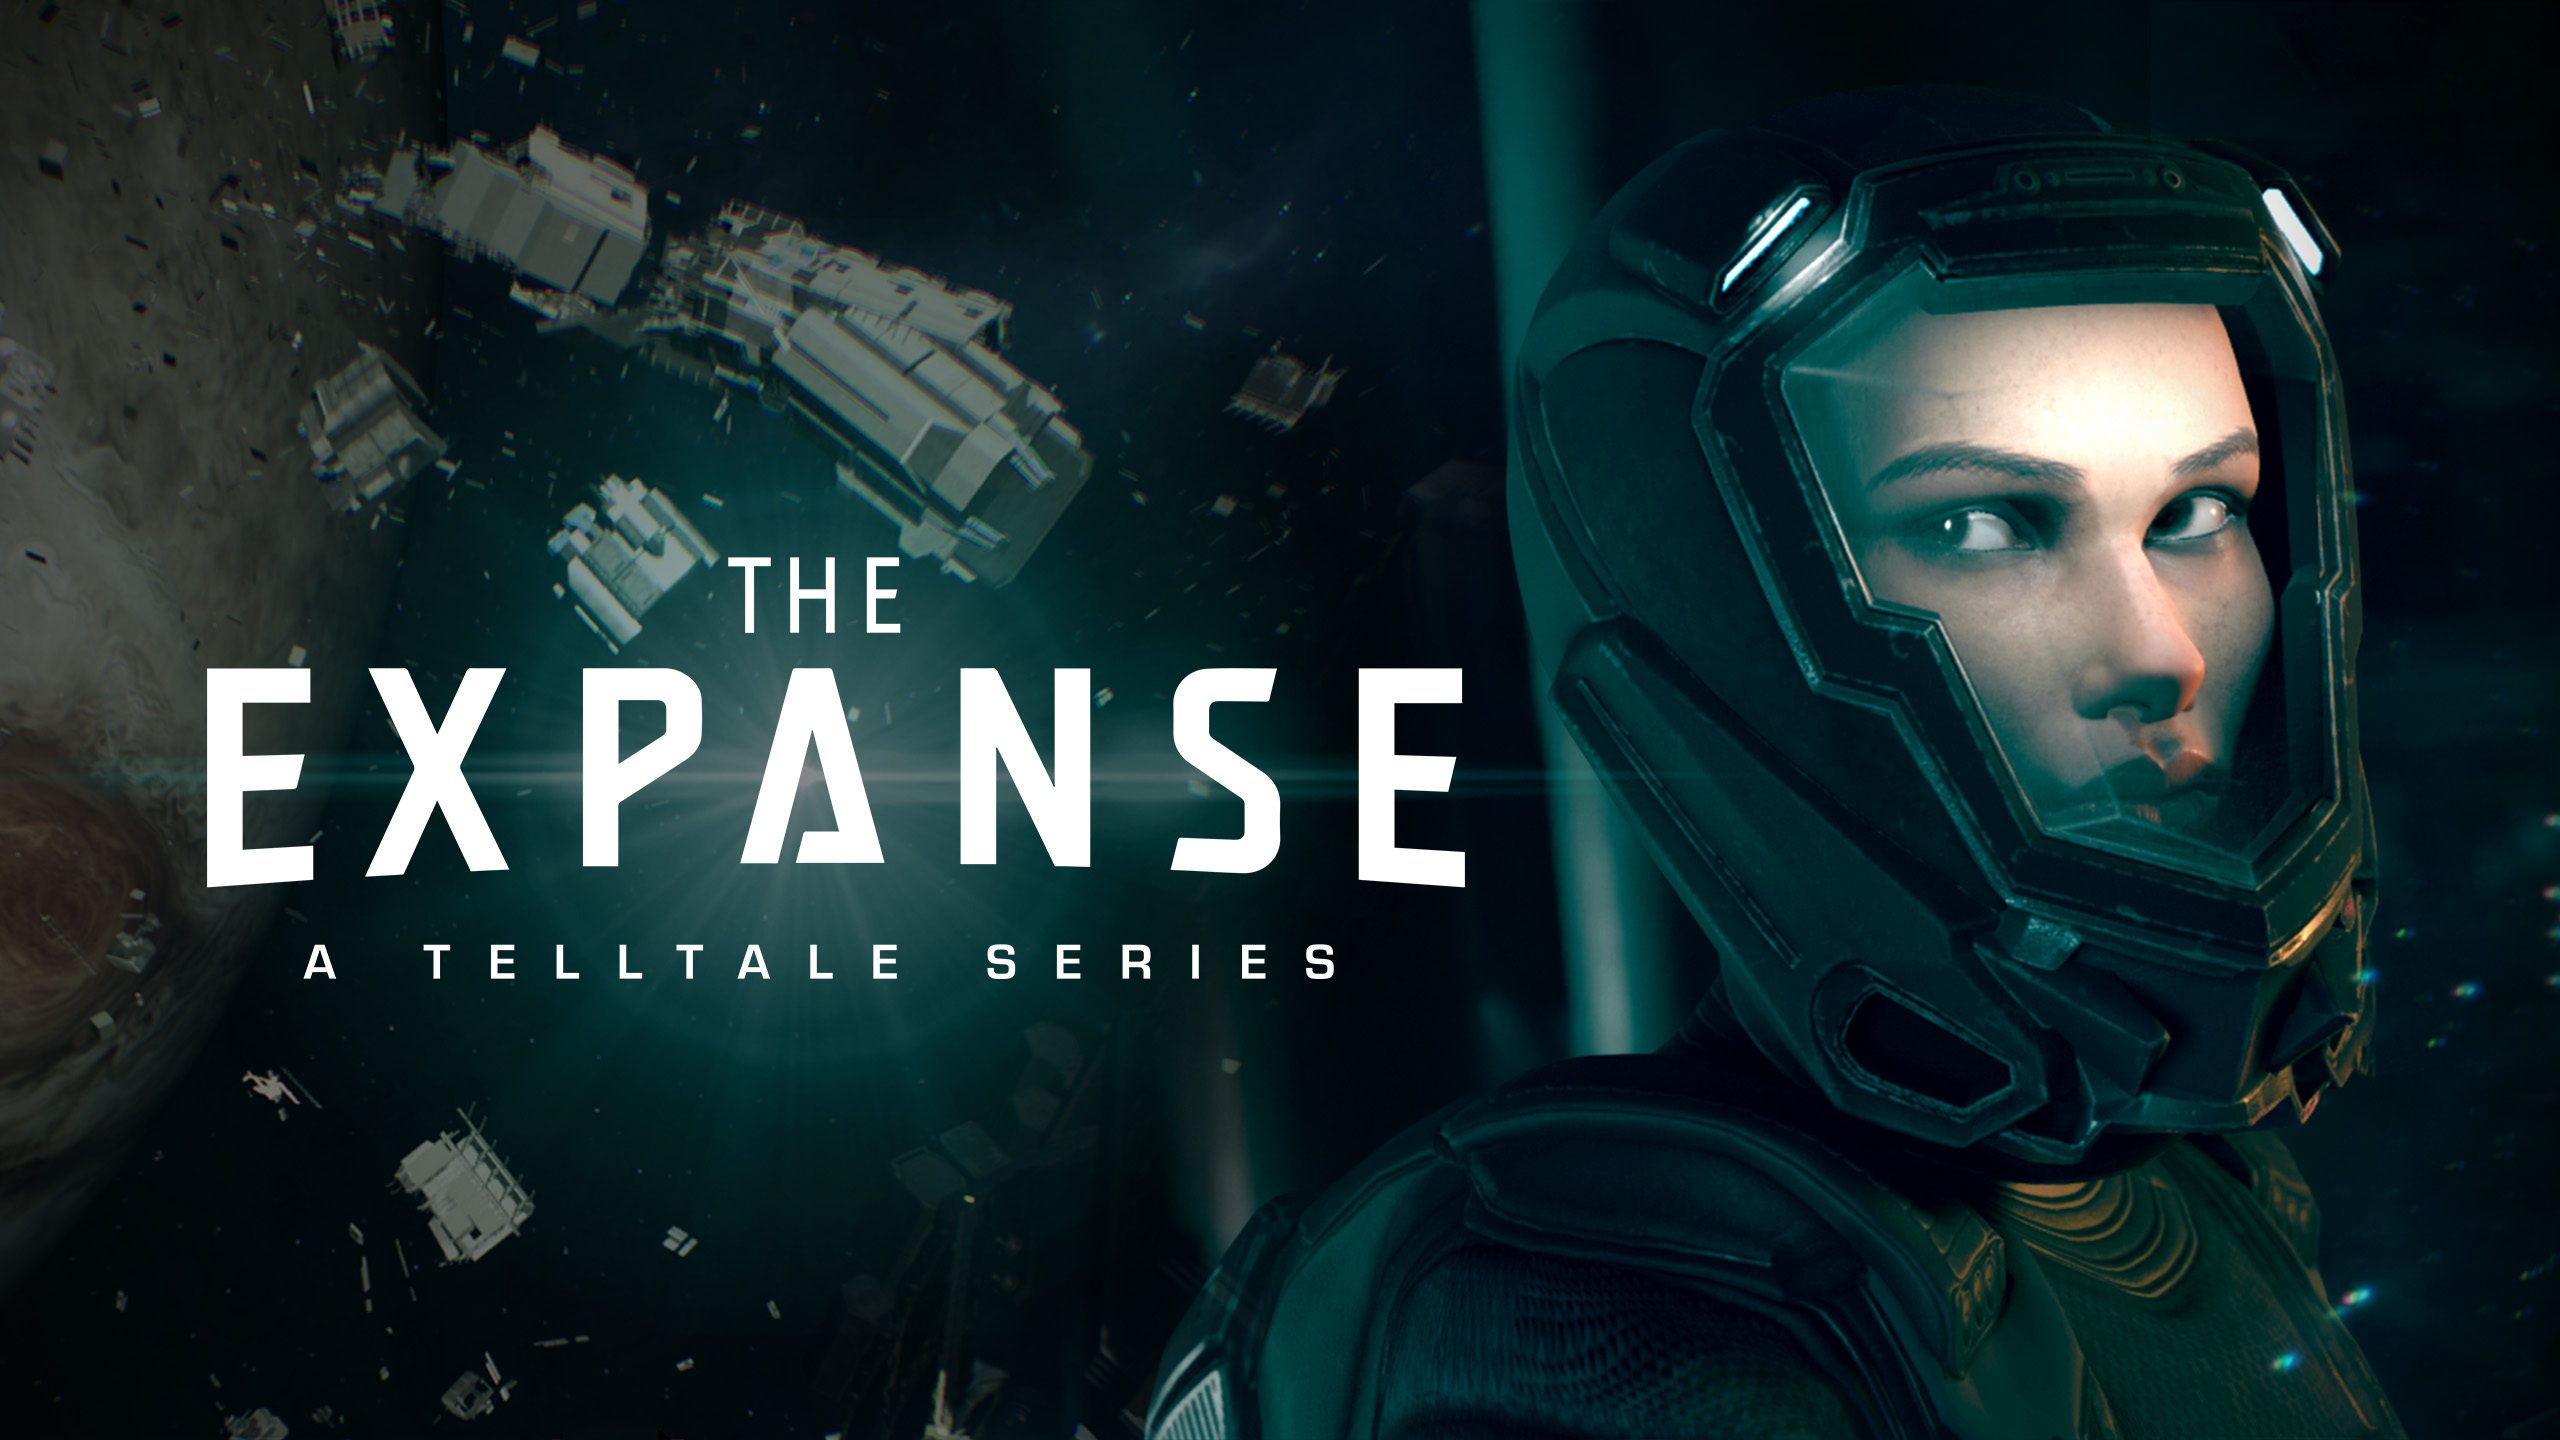 Telltale's The Expanse Special Preview Event and Hands-On Impressions